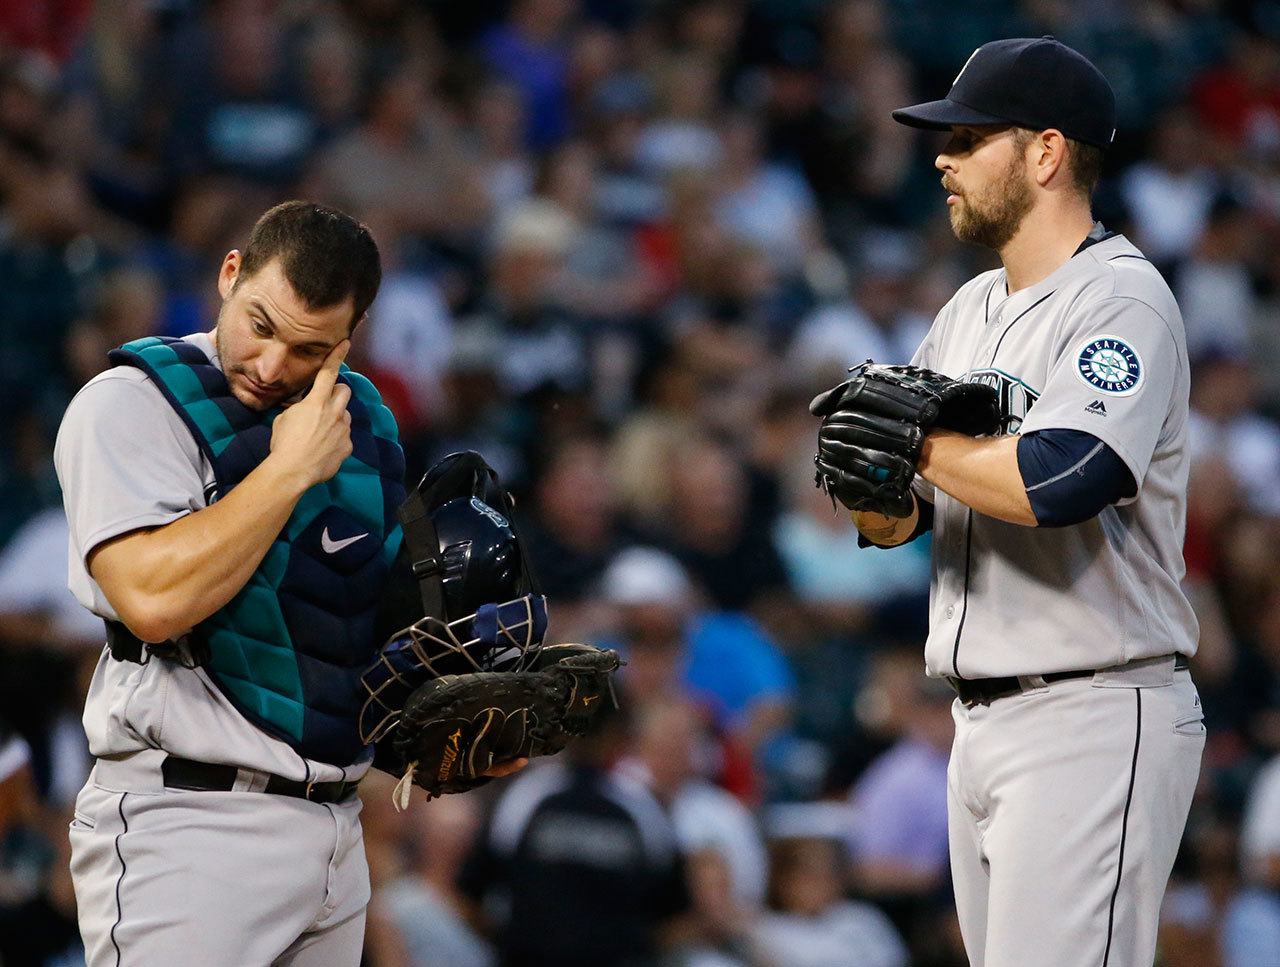 Mariners catcher Mike Zunino (left) wipes his face as he listens to starter James Paxton during the first inning of a game Thursday against the White Sox in Chicago. (AP Photo/Nam Y. Huh)